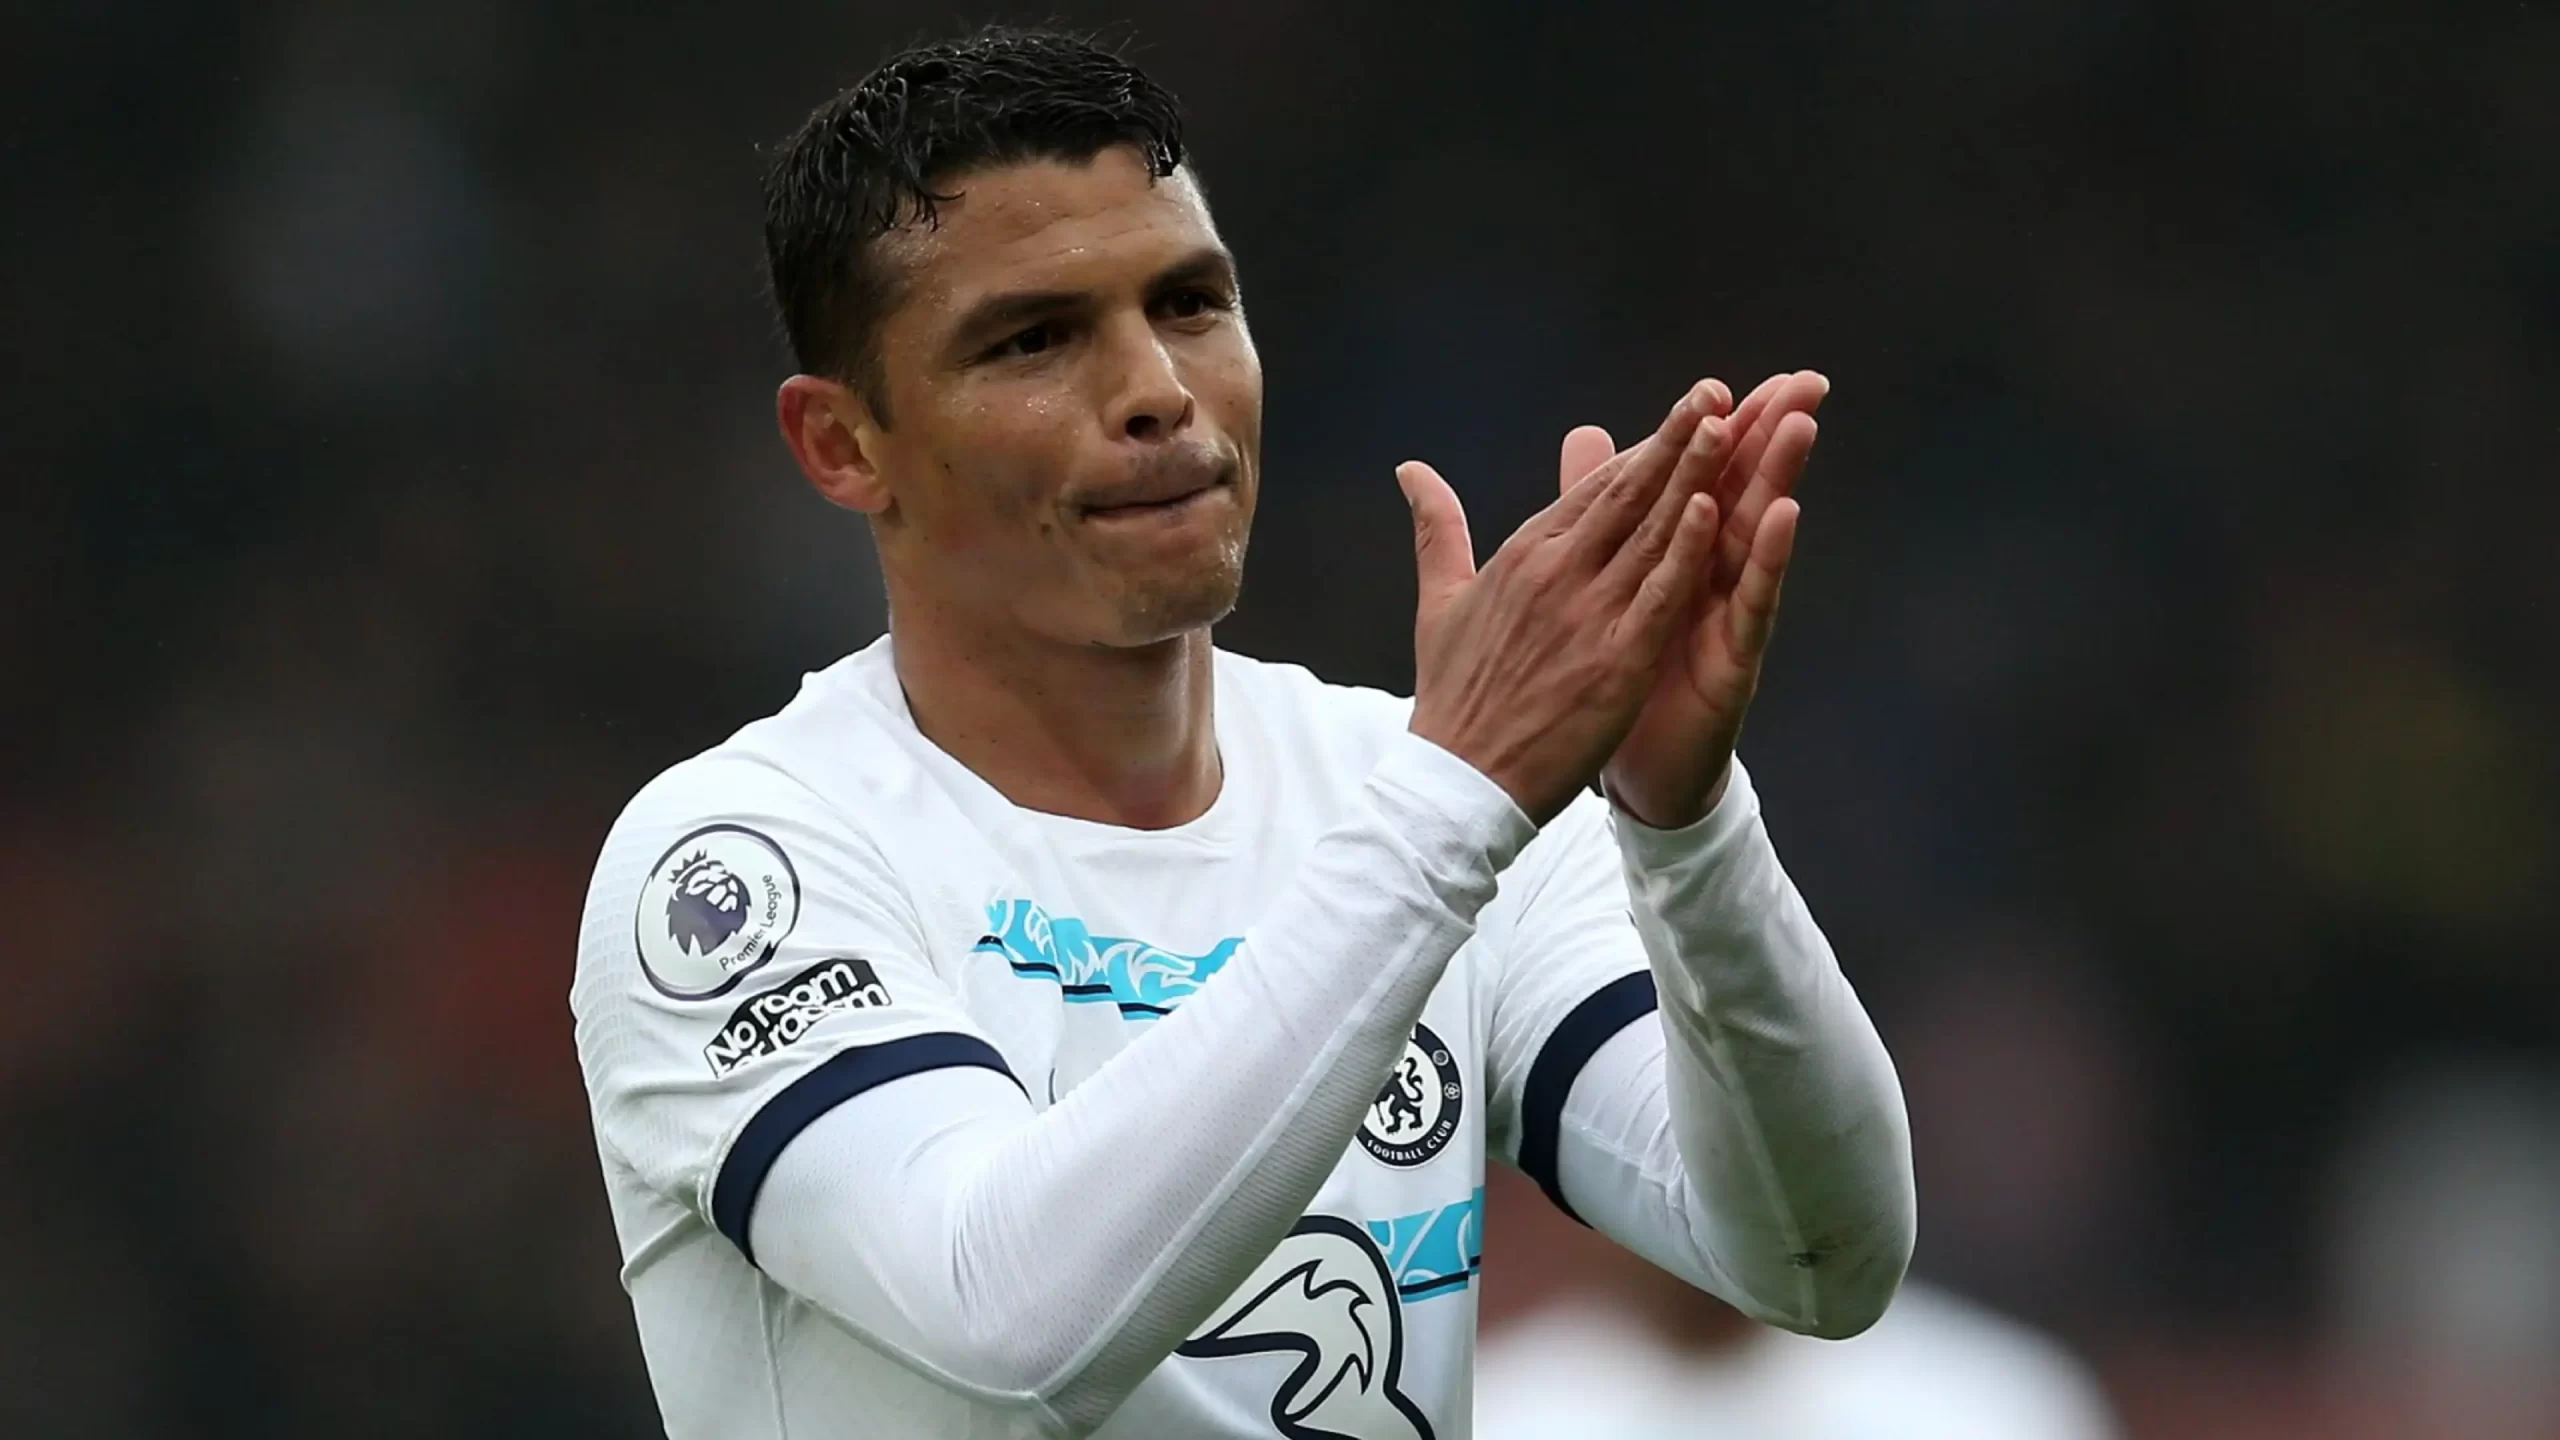 Chelsea defender Thiago Silva could be set to leave the club this summer and return to his former club Fluminense, according to reports from The Telegraph.